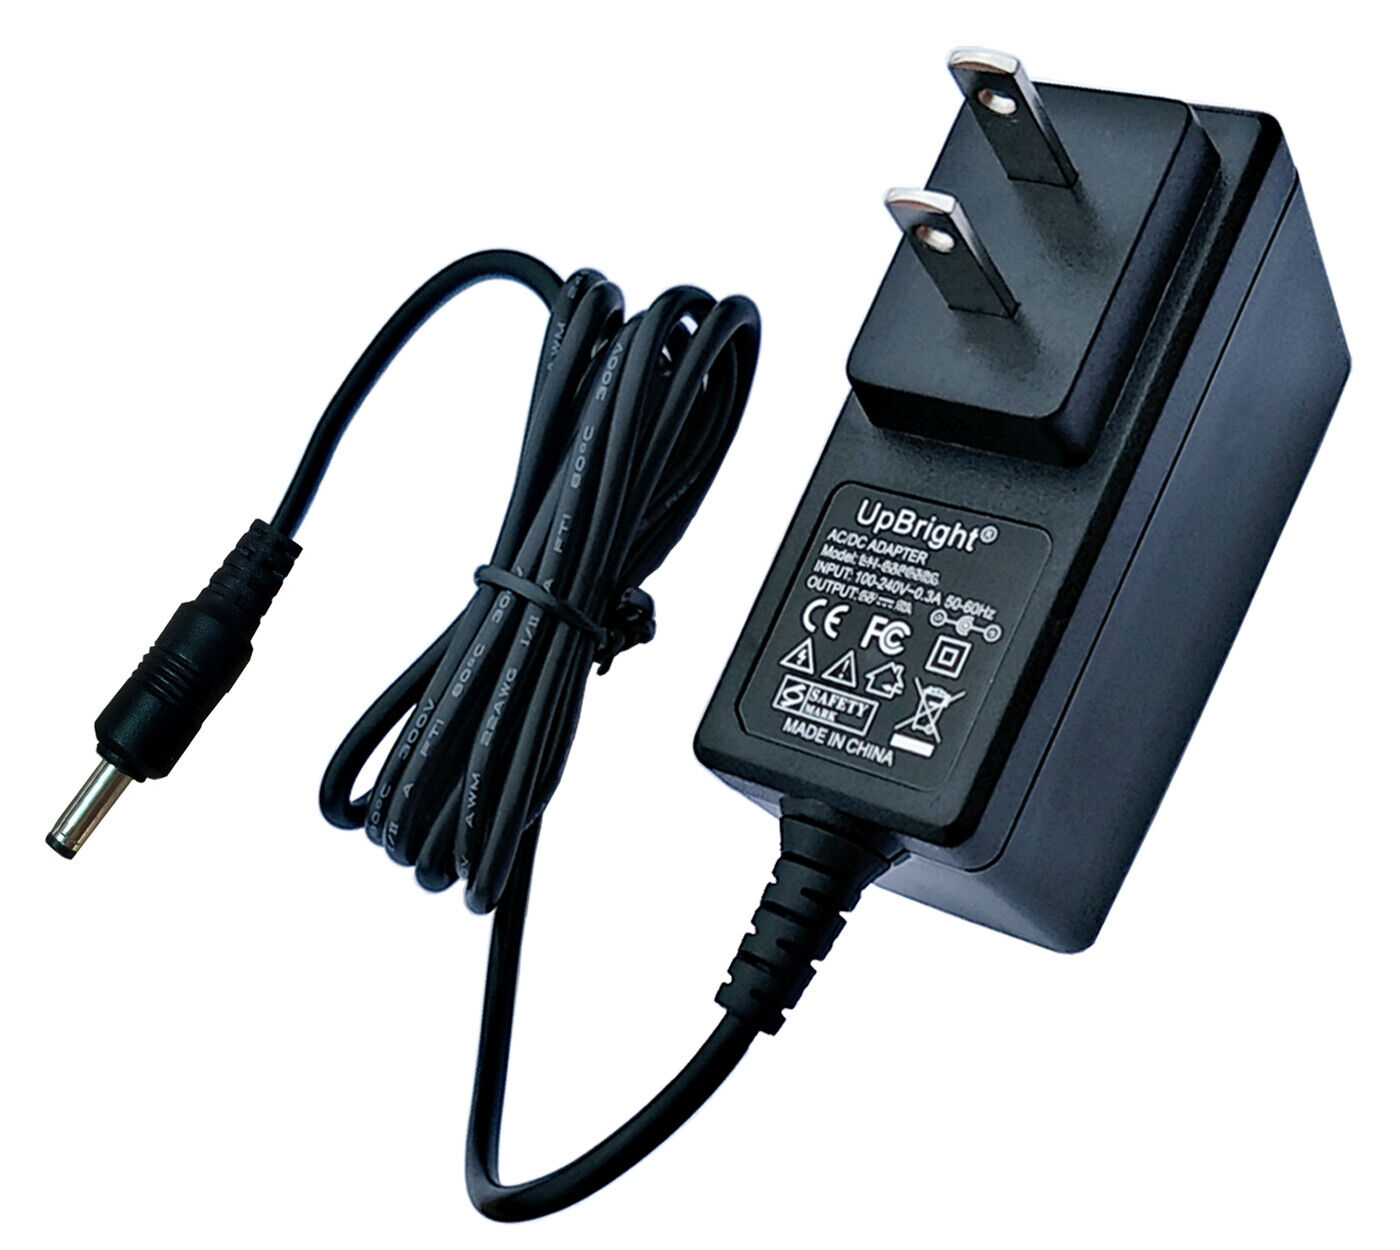 5V AC Adapter For Arcade1up Ms. PAC-MAN 8261 8296 Countercade Game Power Supply